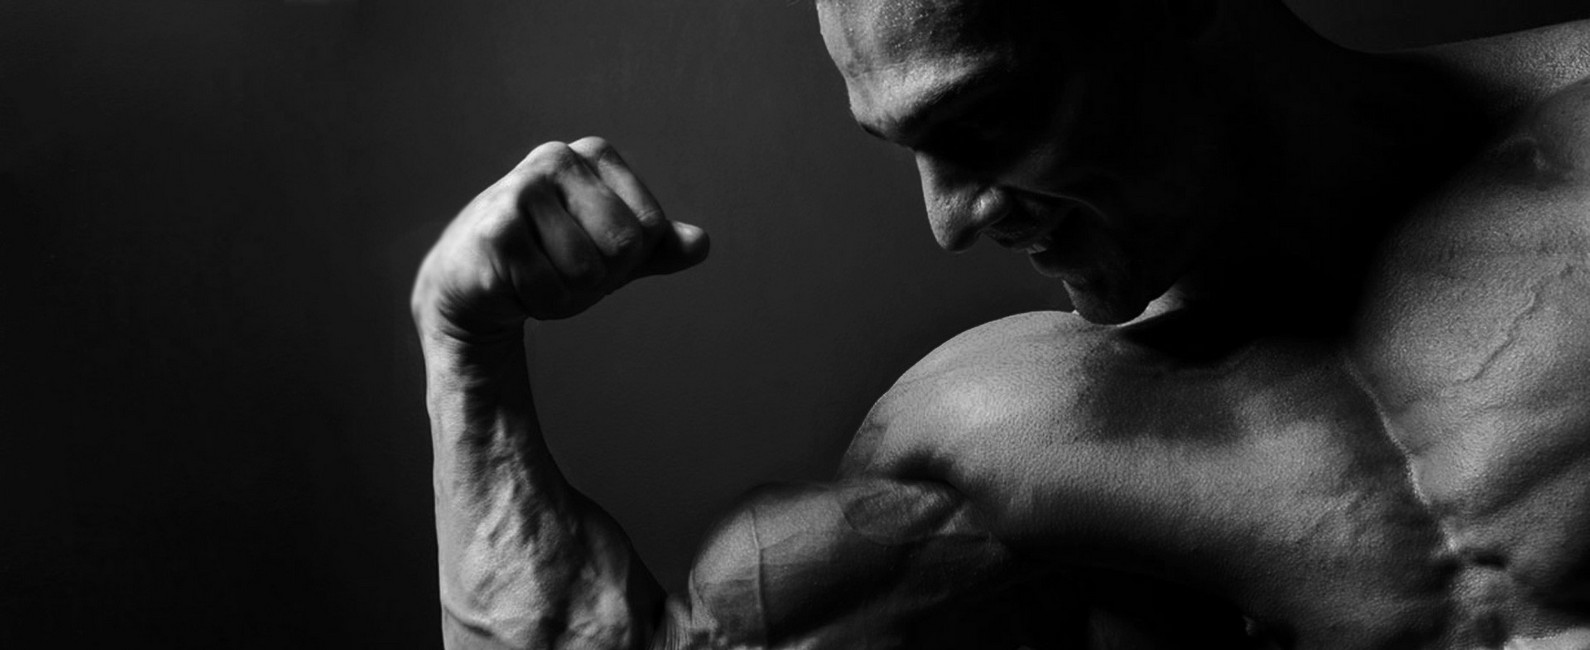 best injectable steroids for mass